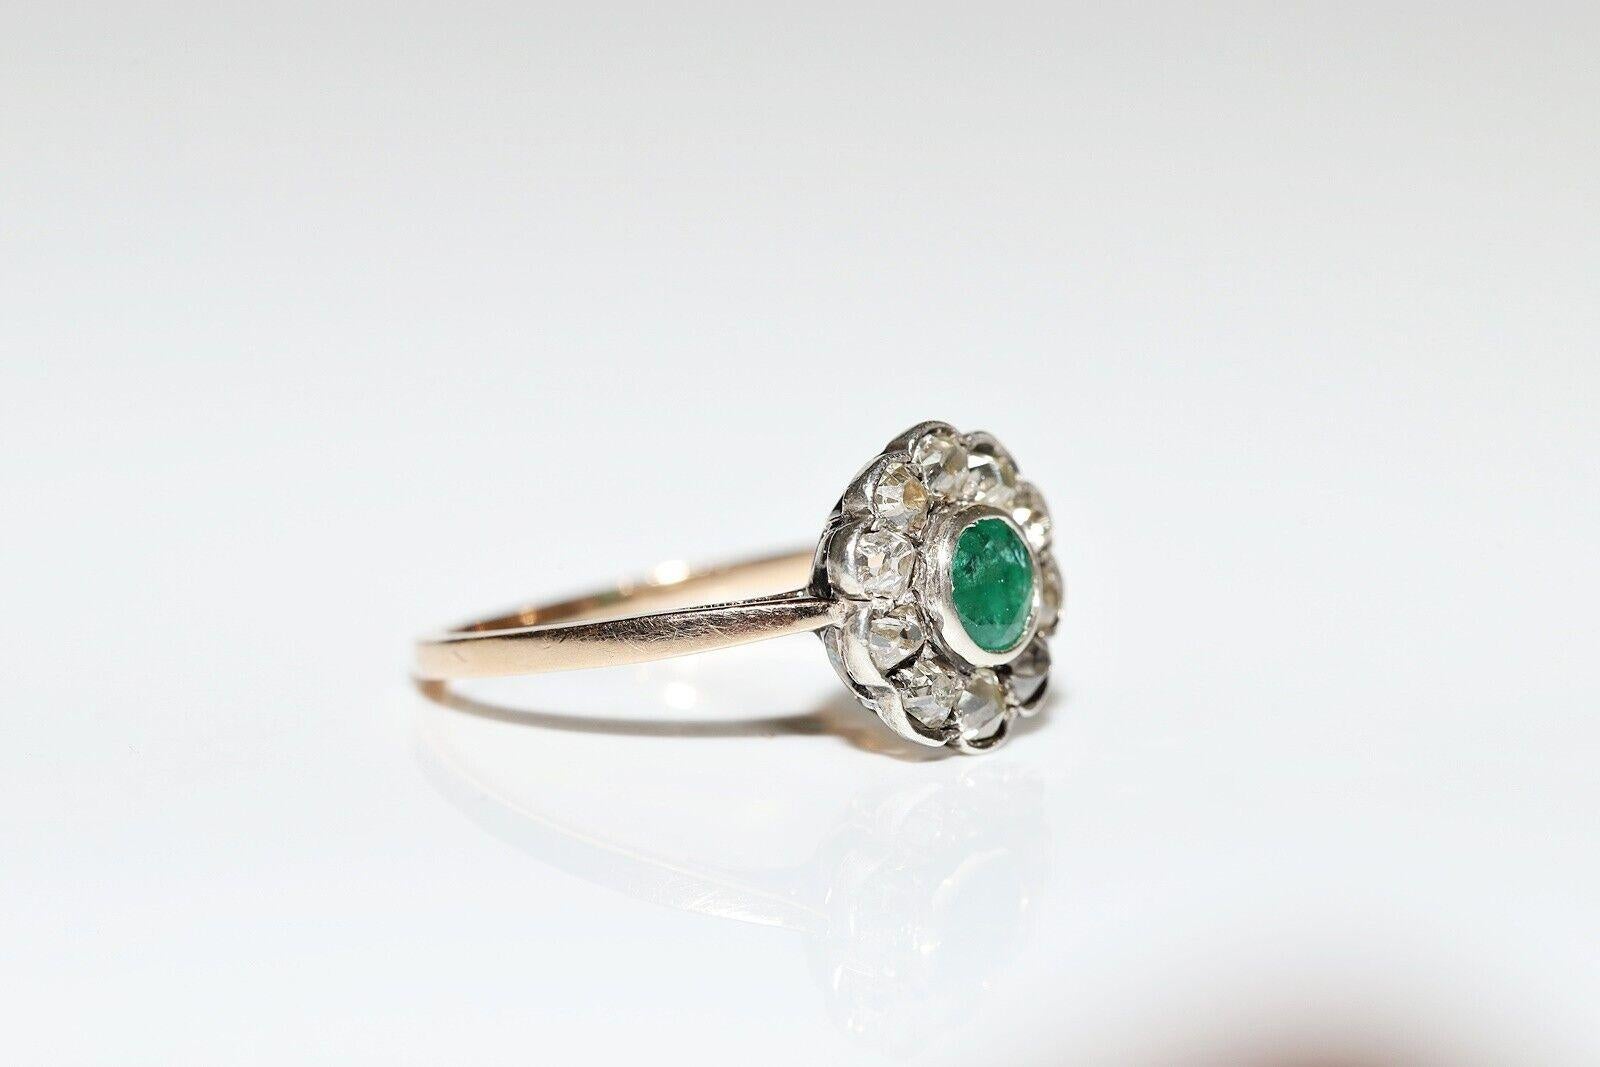 Antique Circa 1900s 14k Gold Natural Old Cut Diamond And Emerald Ring  For Sale 7